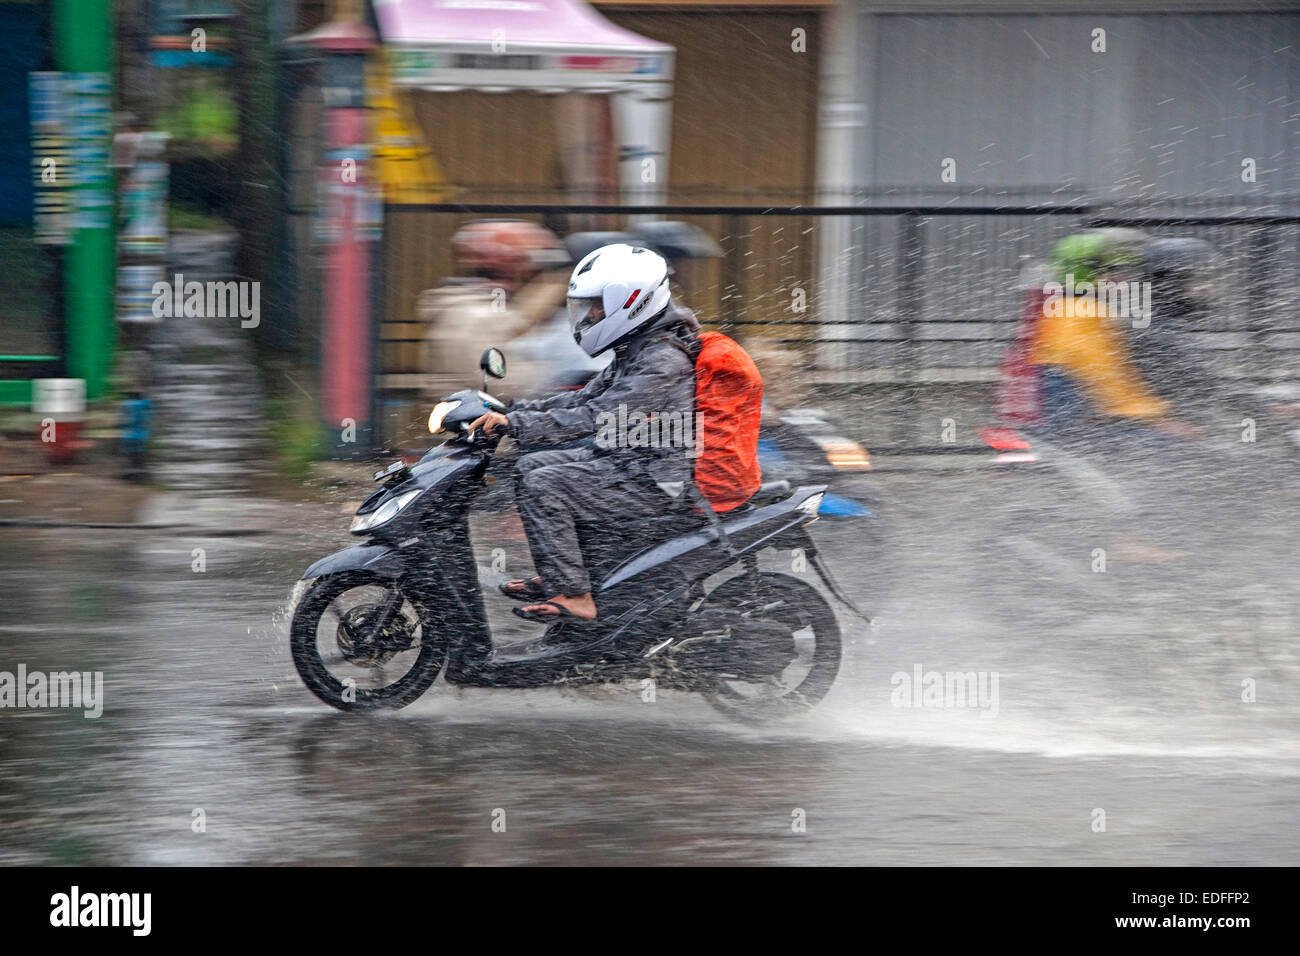 Soaked Indonesian biker riding on scooter during downpour in the rainy season in Kota Bandung, West Java, Indonesia Stock Photo